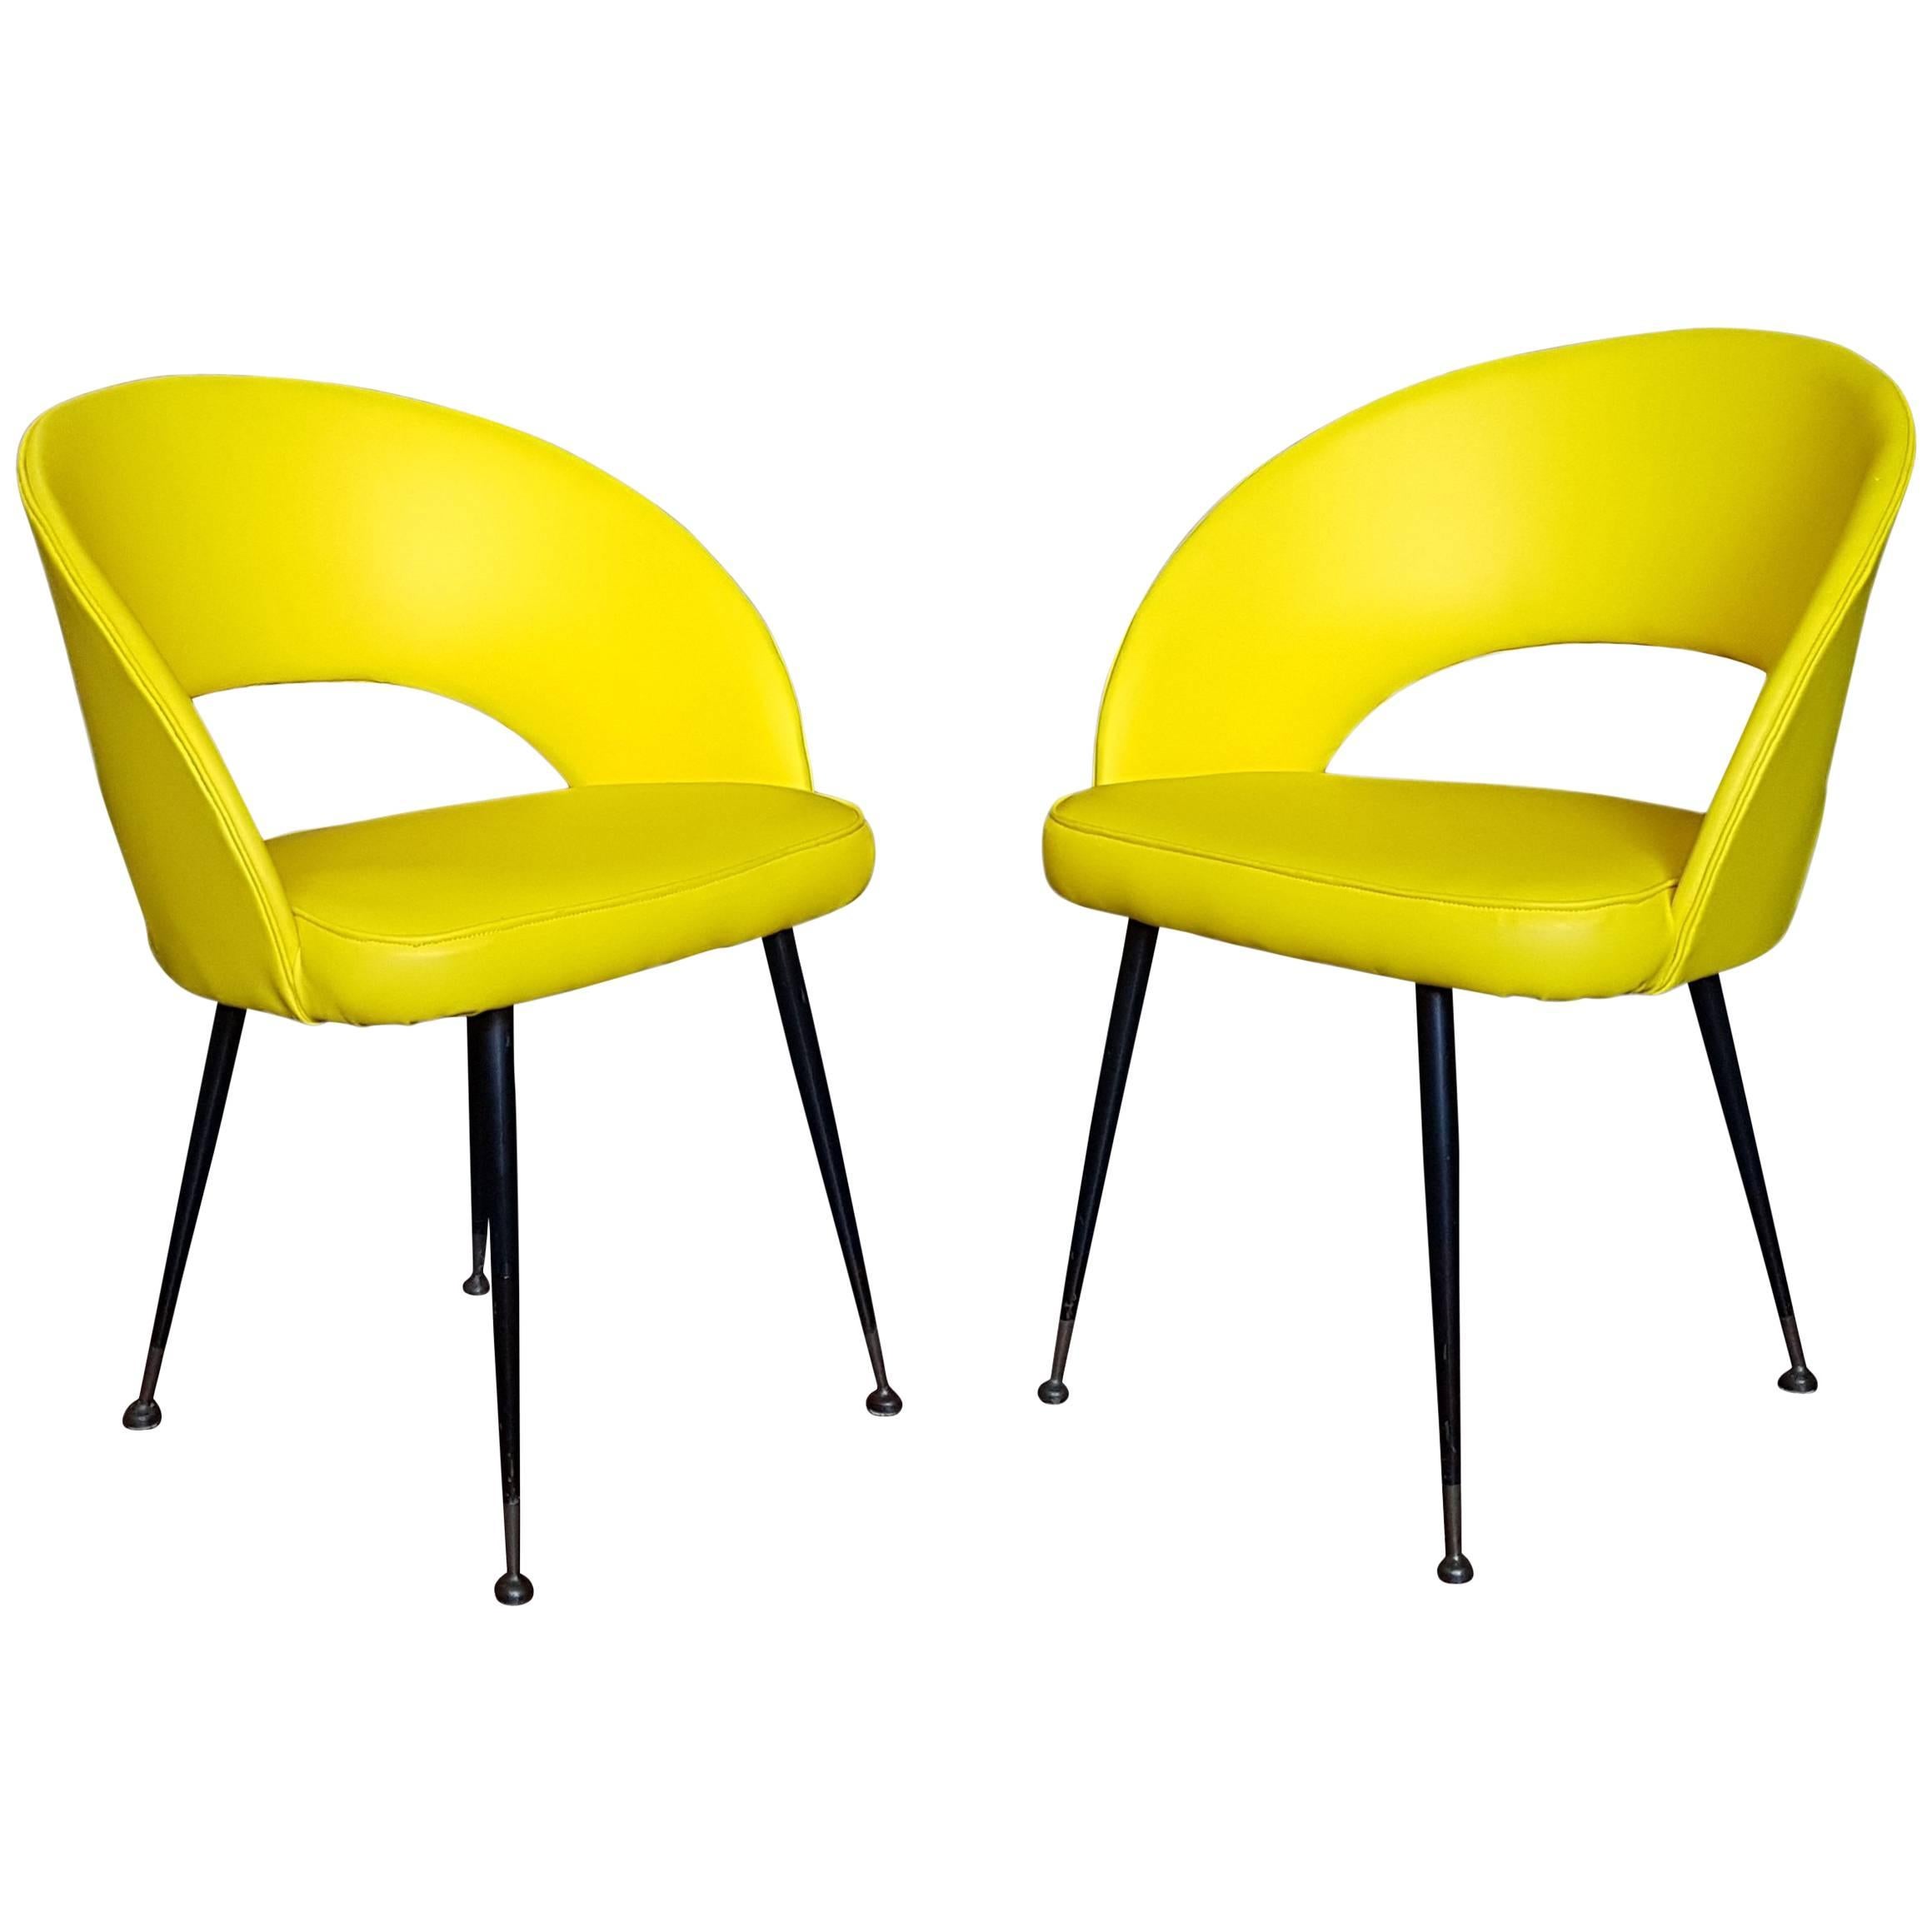 1950s Pair of Yellow Armchairs